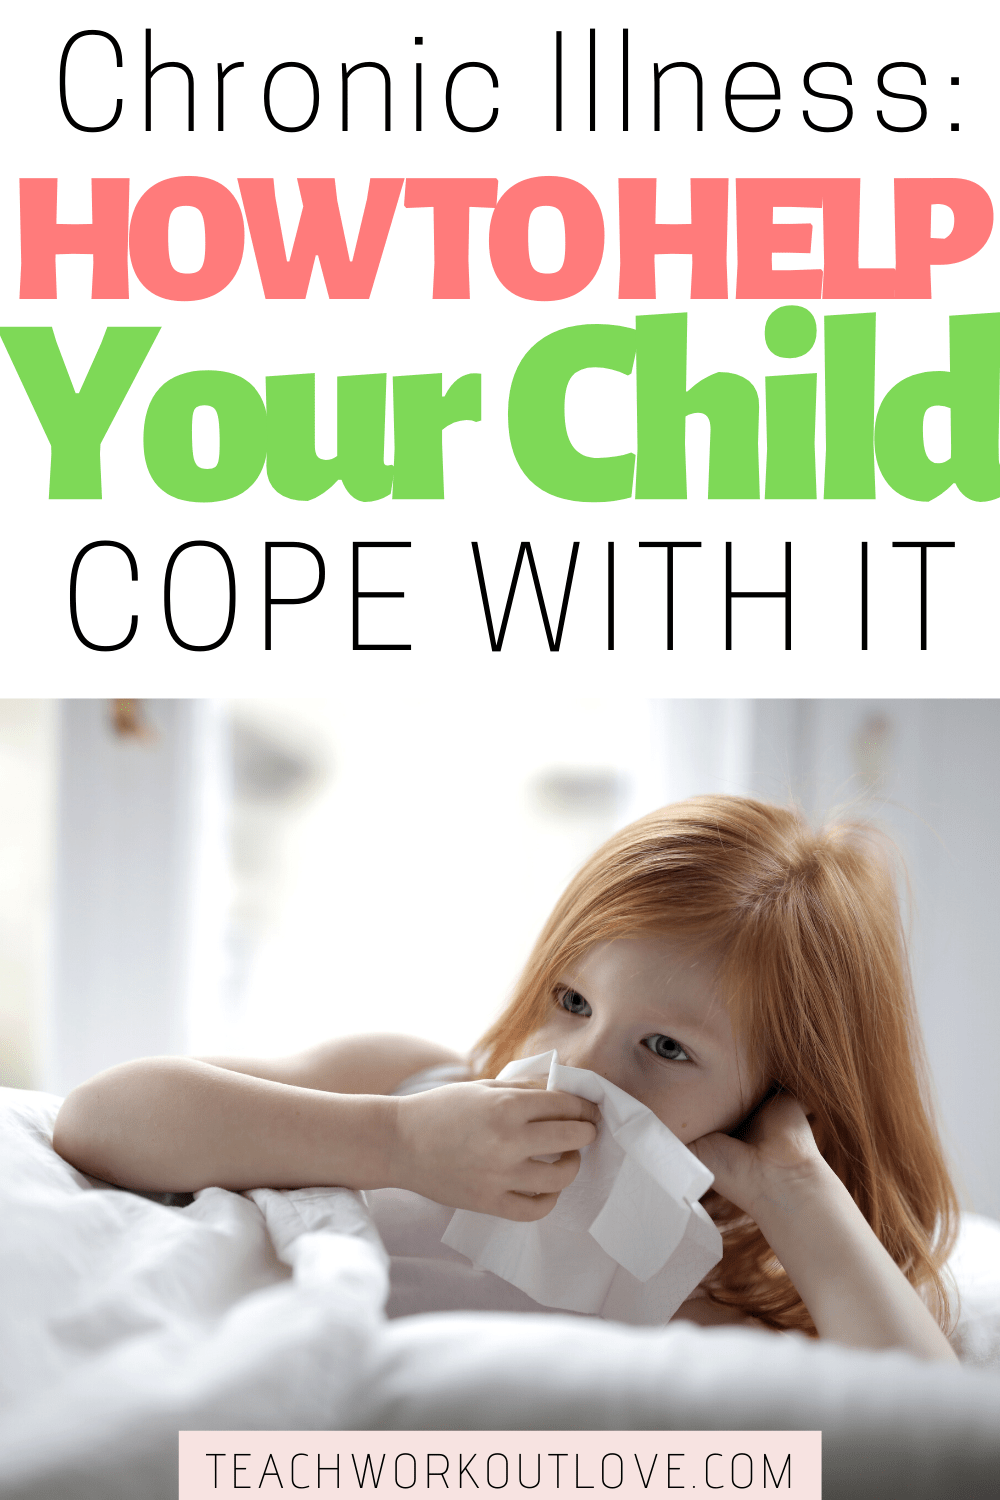 How can we help our chil cope with always being sick? To help their kids cope with a chronic illness, moms can educate, and help kids adjust.